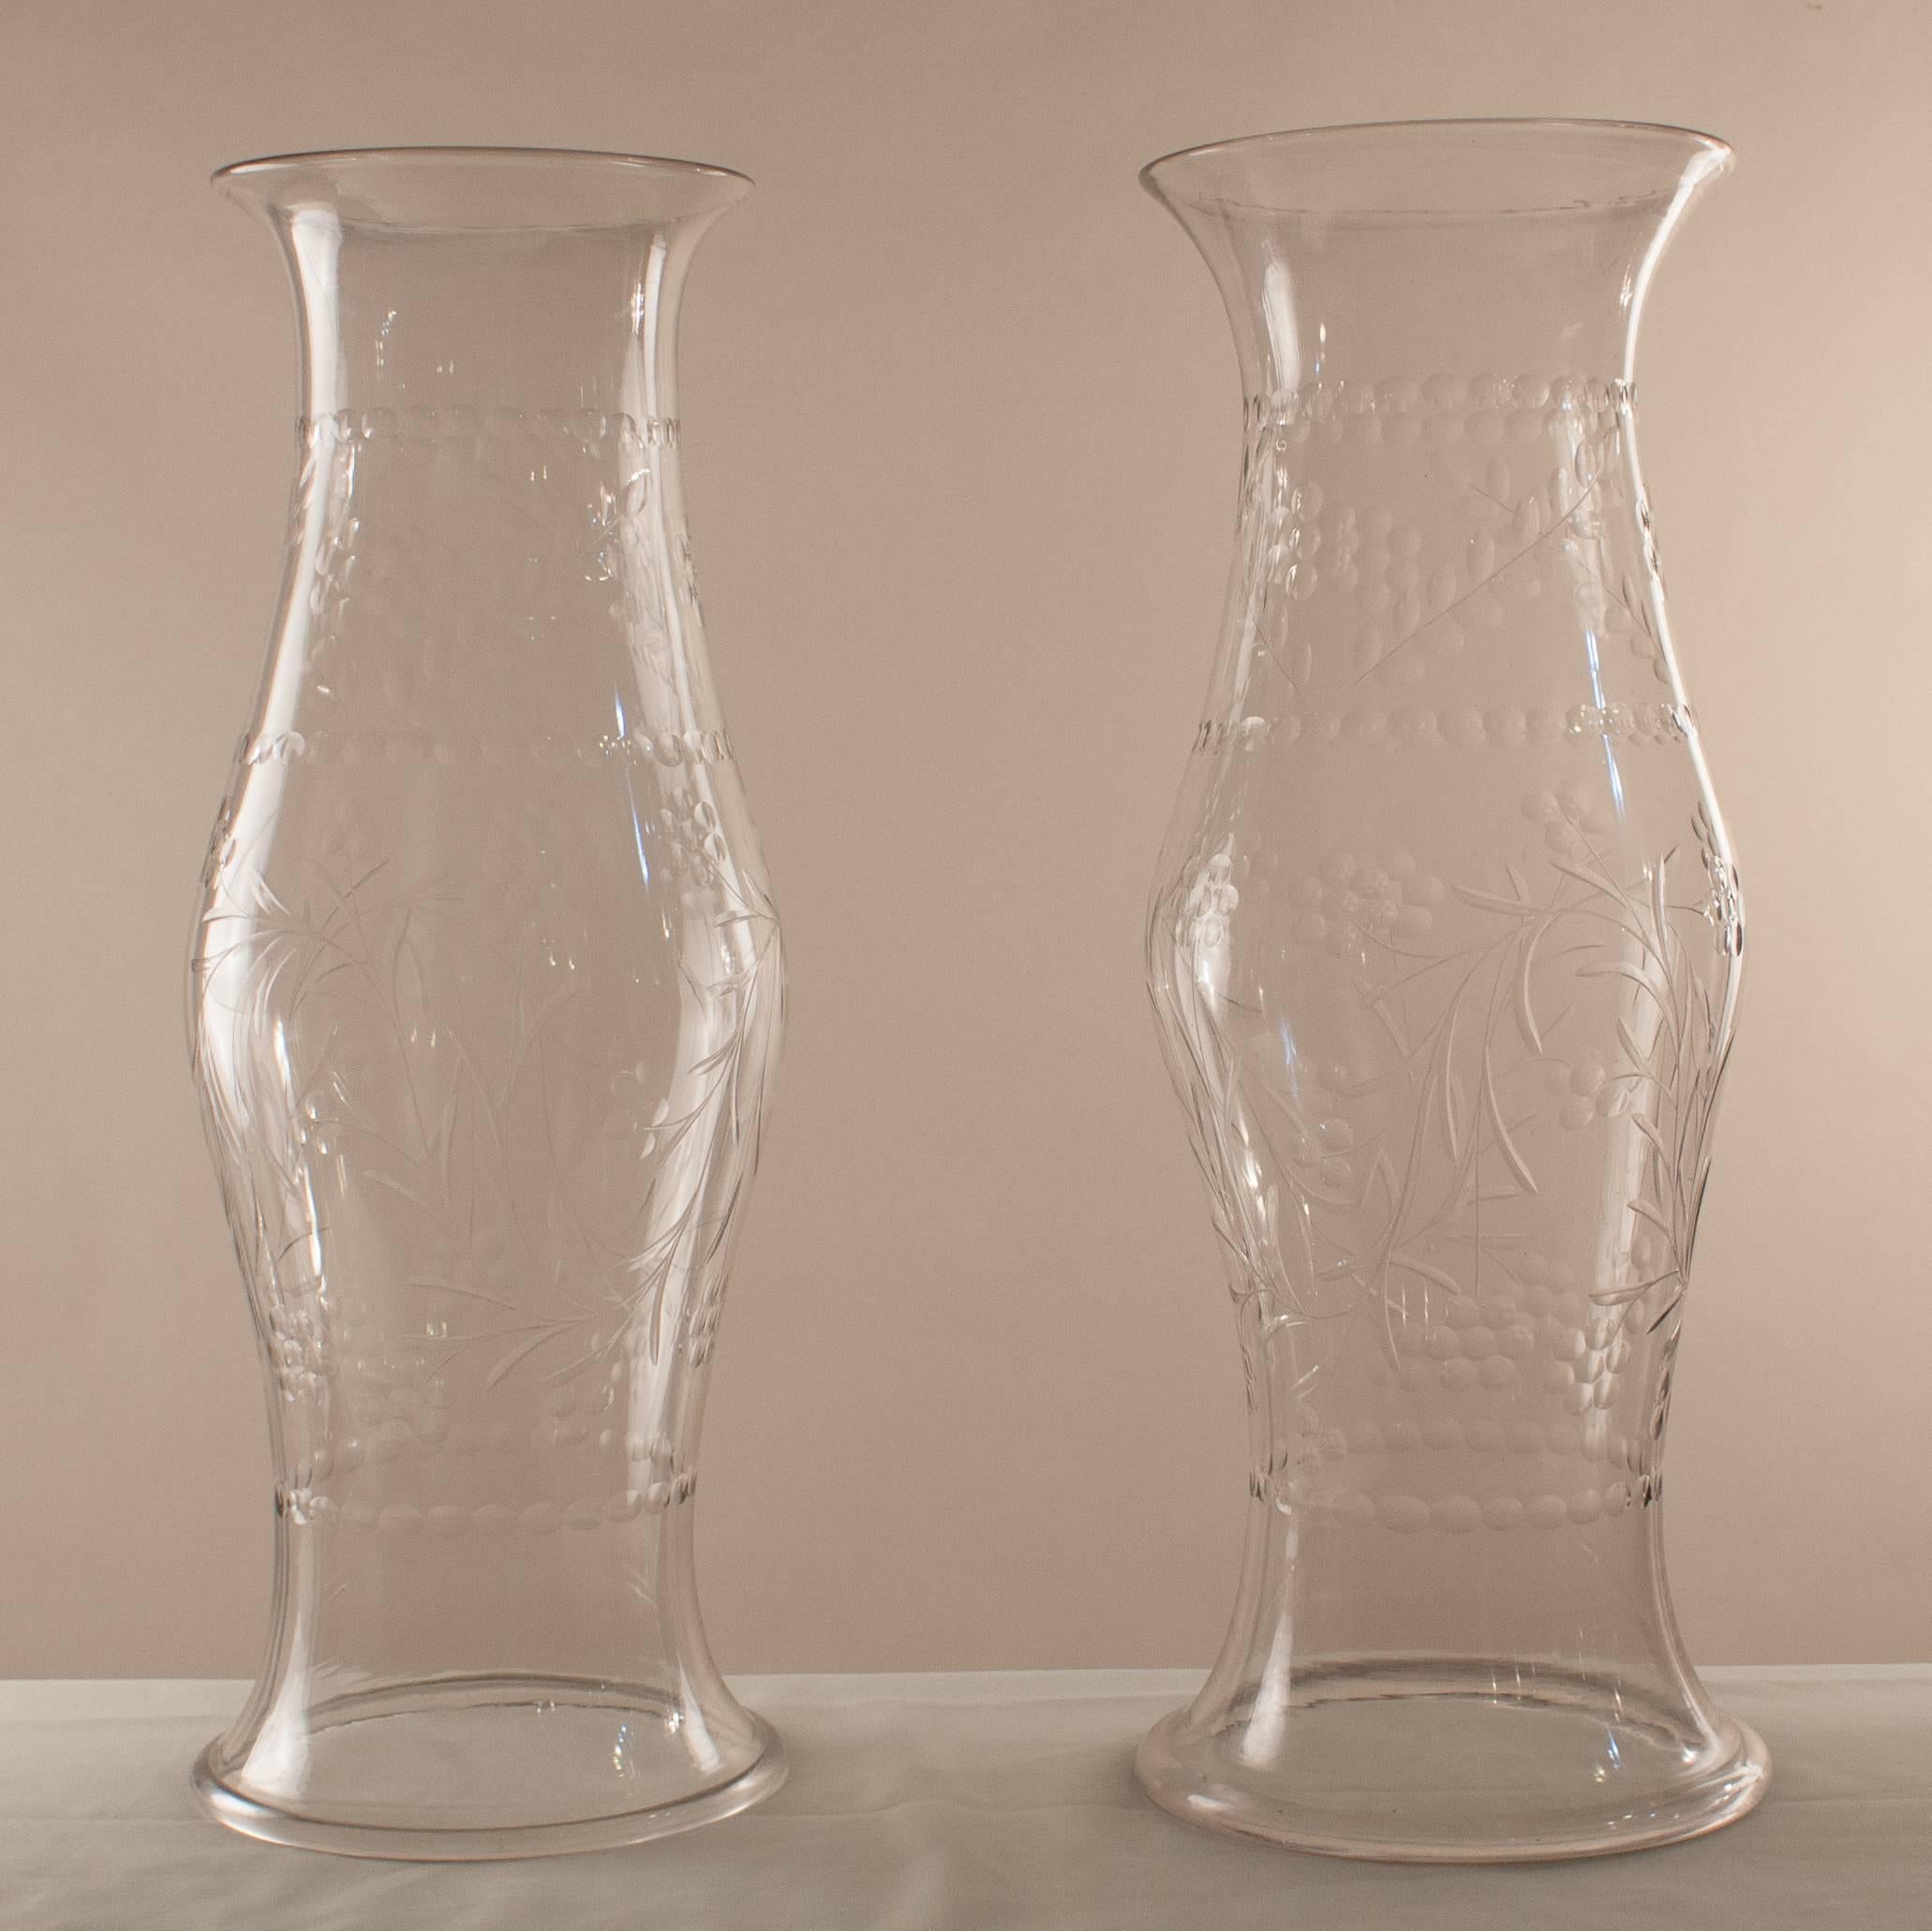 A rare pair of English handblown glass hurricane shields with exquisite form and a finely etched vine and floral design that is the perfect complement to these 19th century shades. The shields, which shelter candles or candlesticks, are in excellent